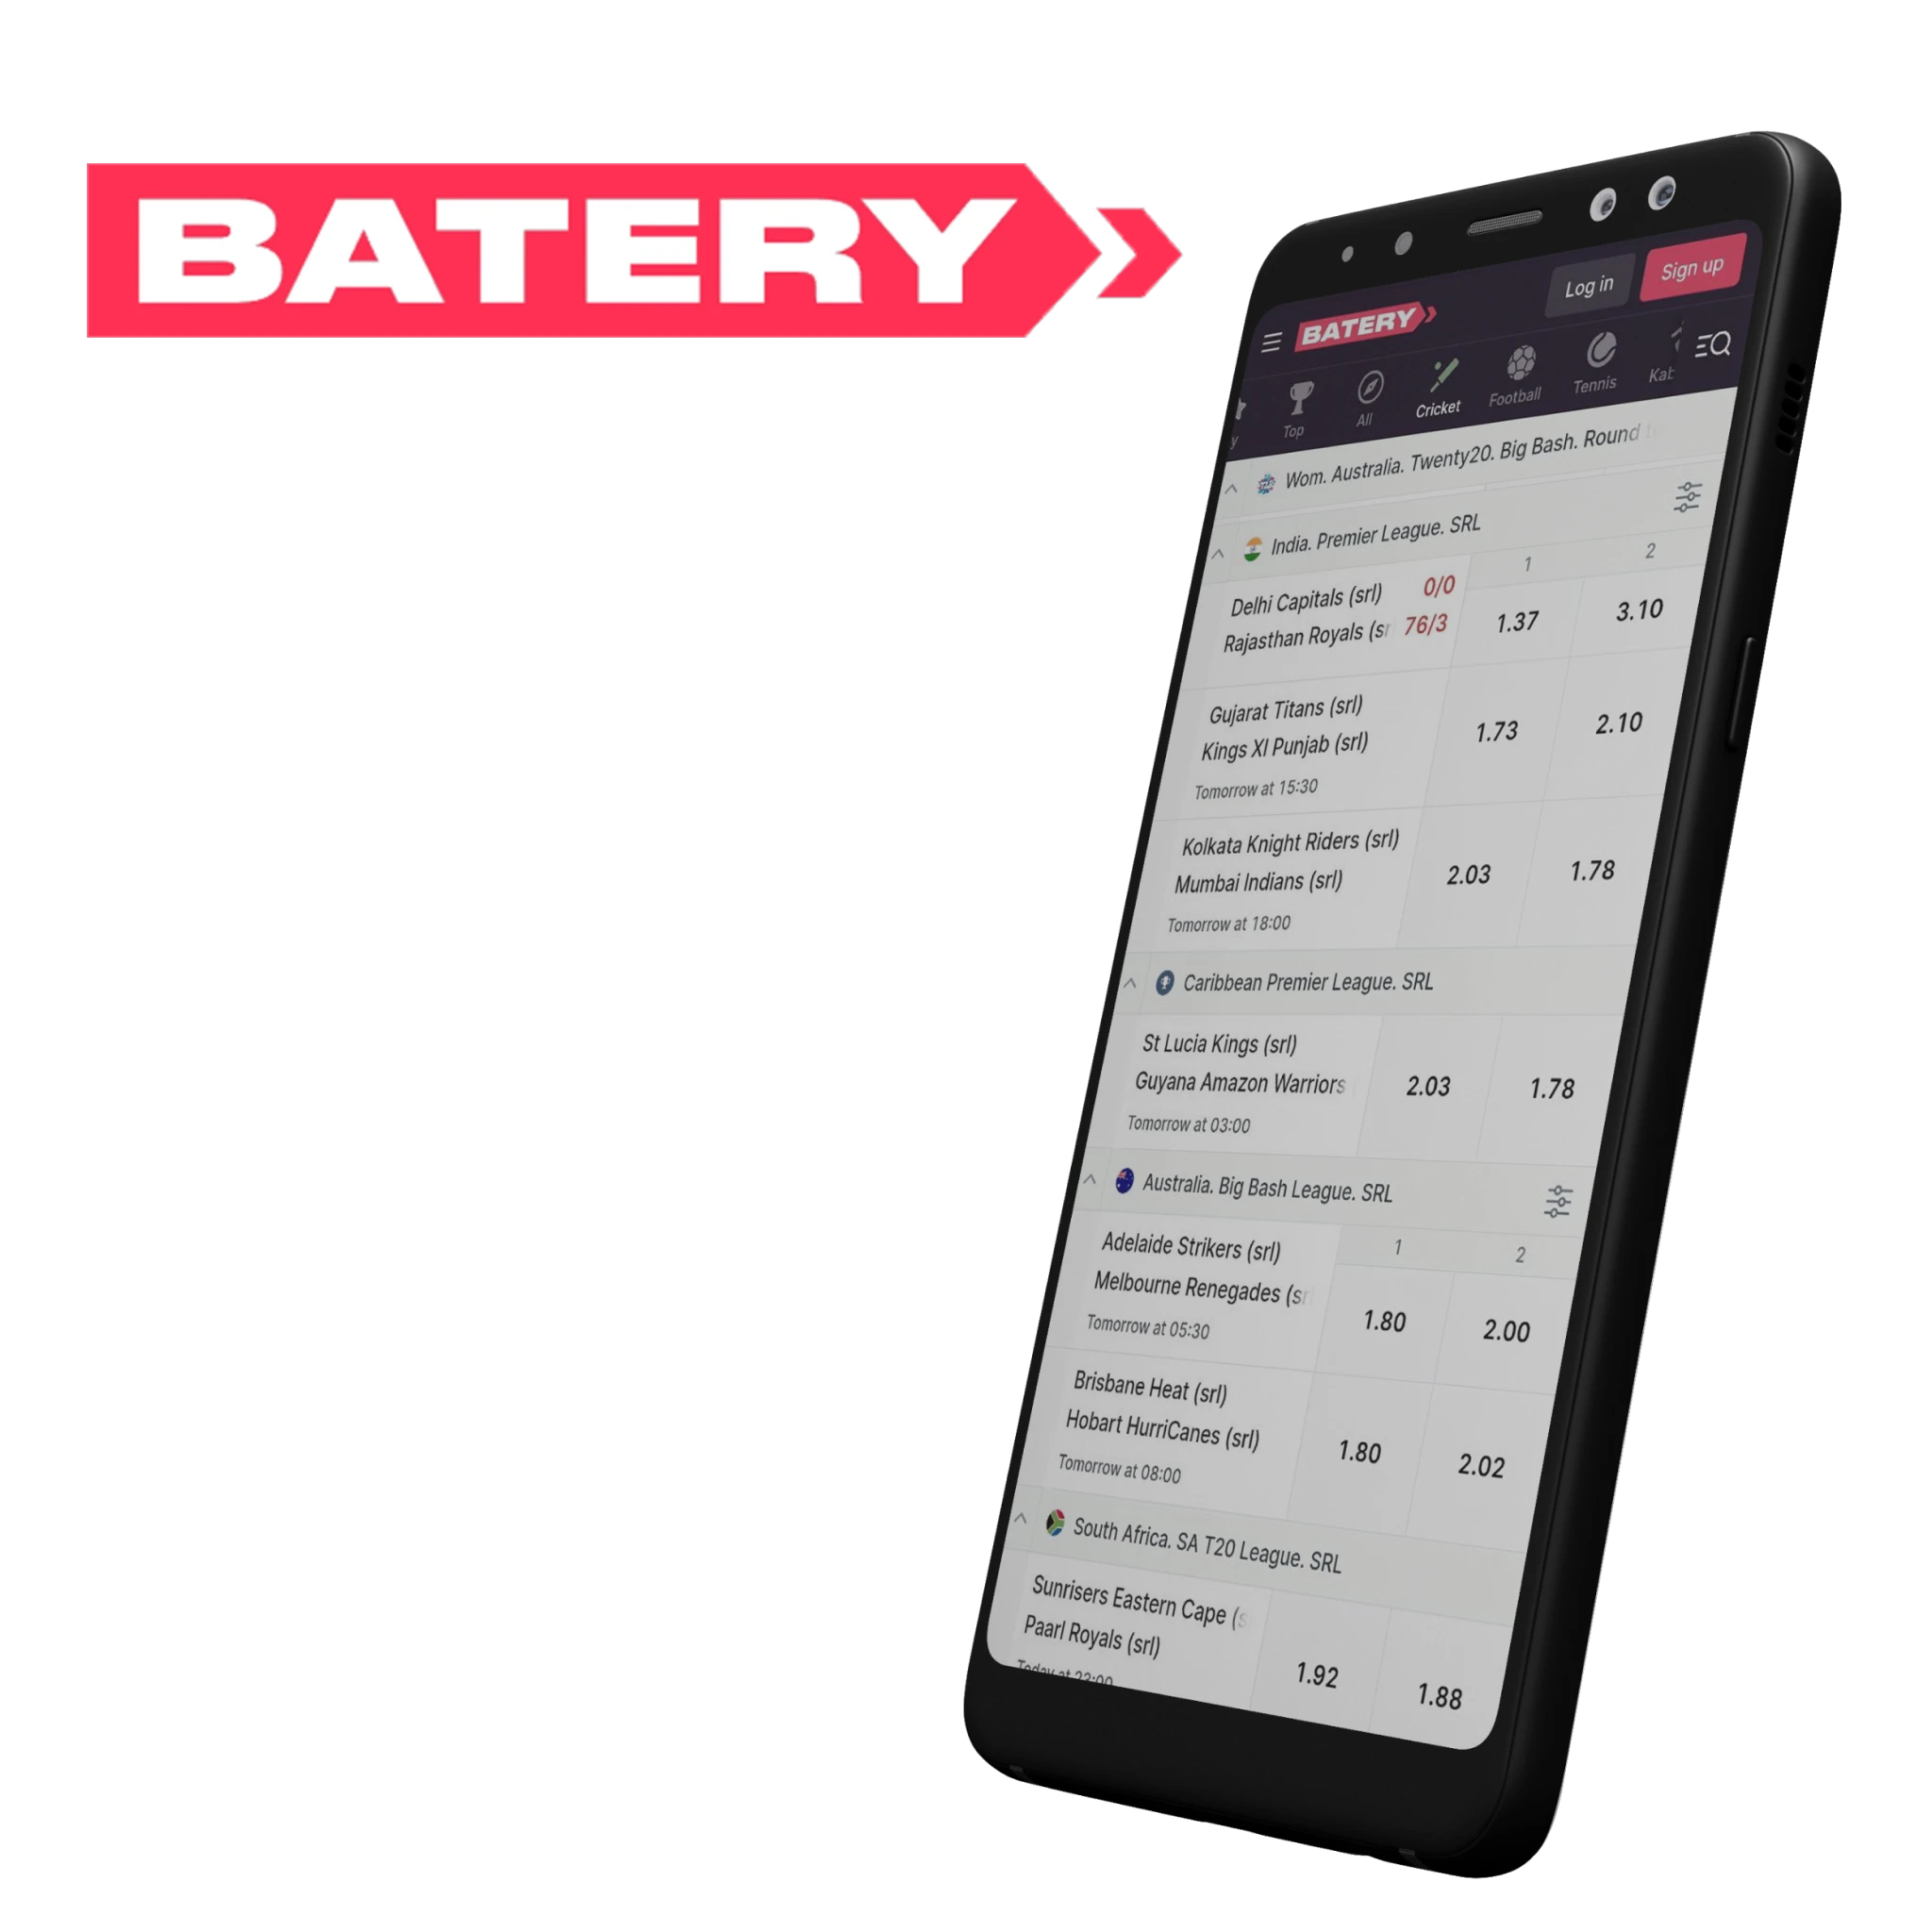 Getting the Batery app is a task that allows users to enjoy all its features on their devices hassle-free.